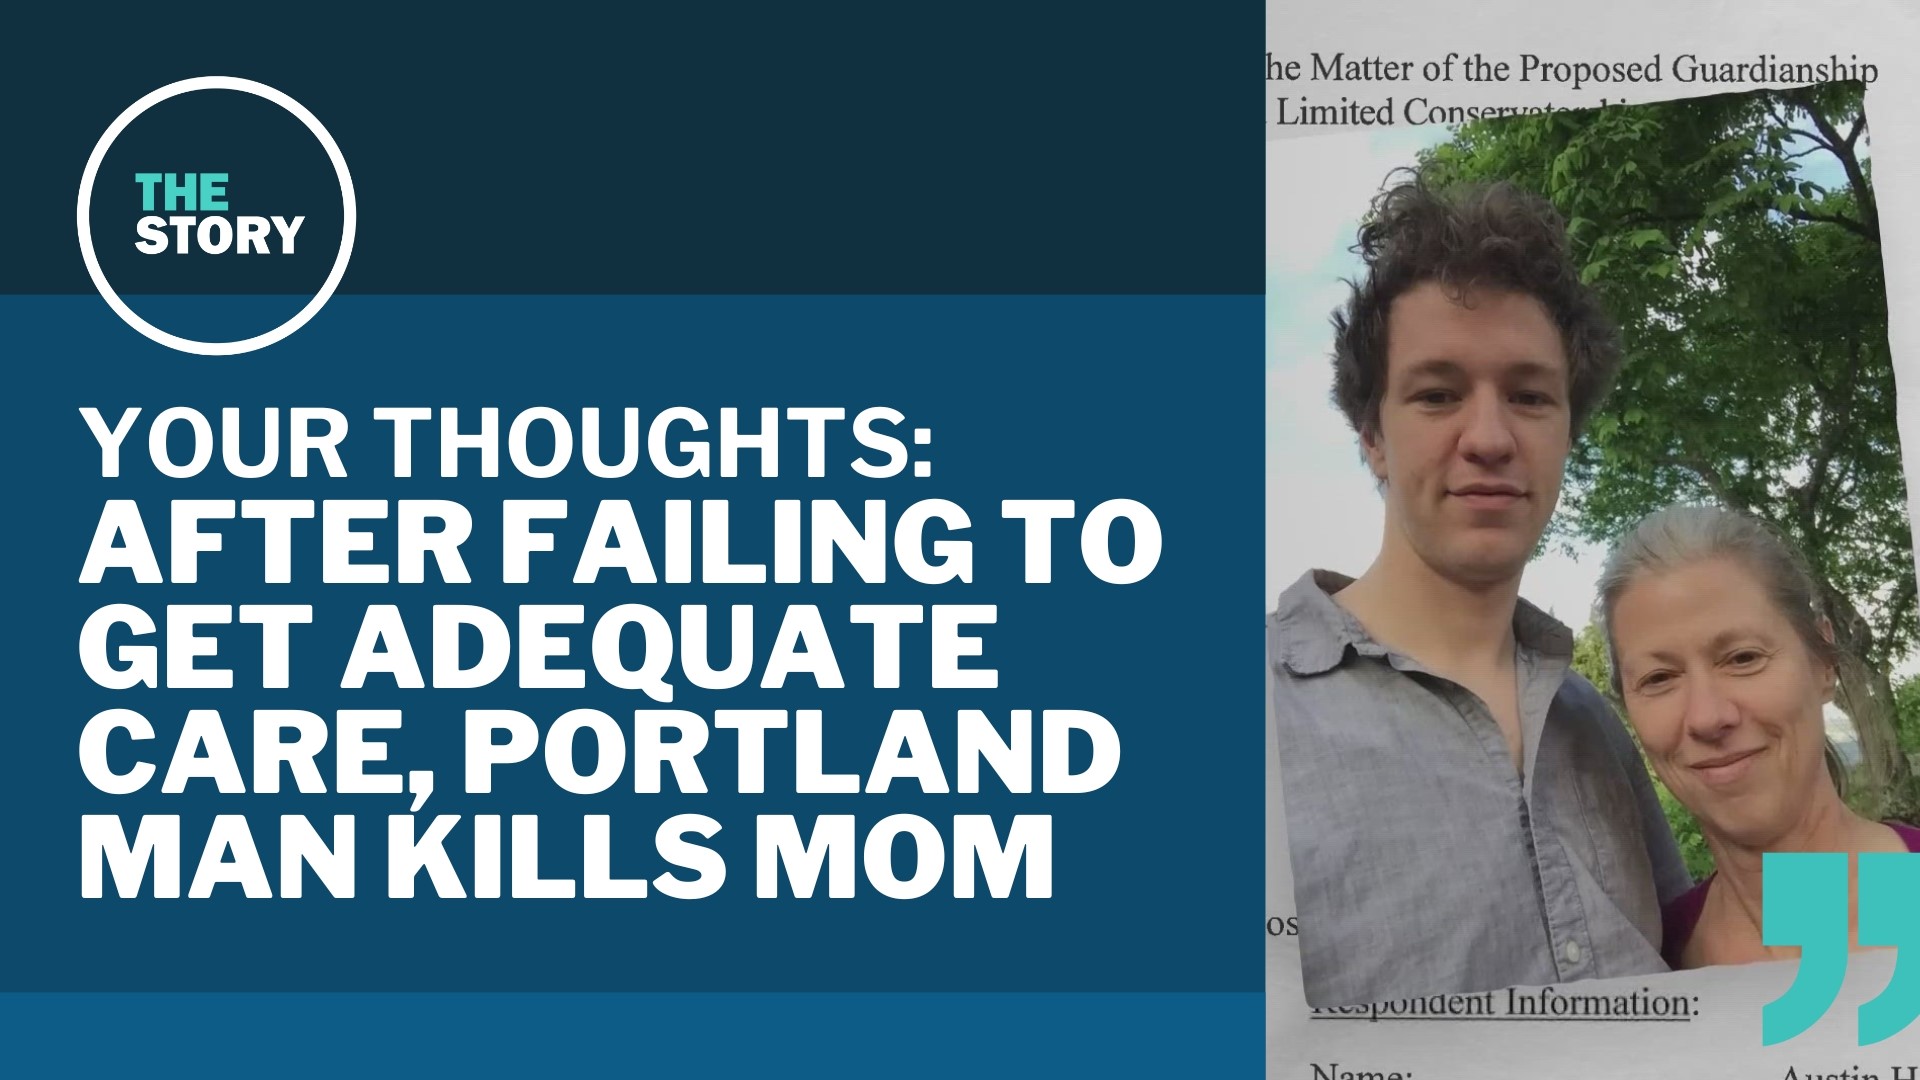 Yesterday, we brought you the story of a Portland man who killed his mother while in a psychotic state. Here's what you had to say about it.